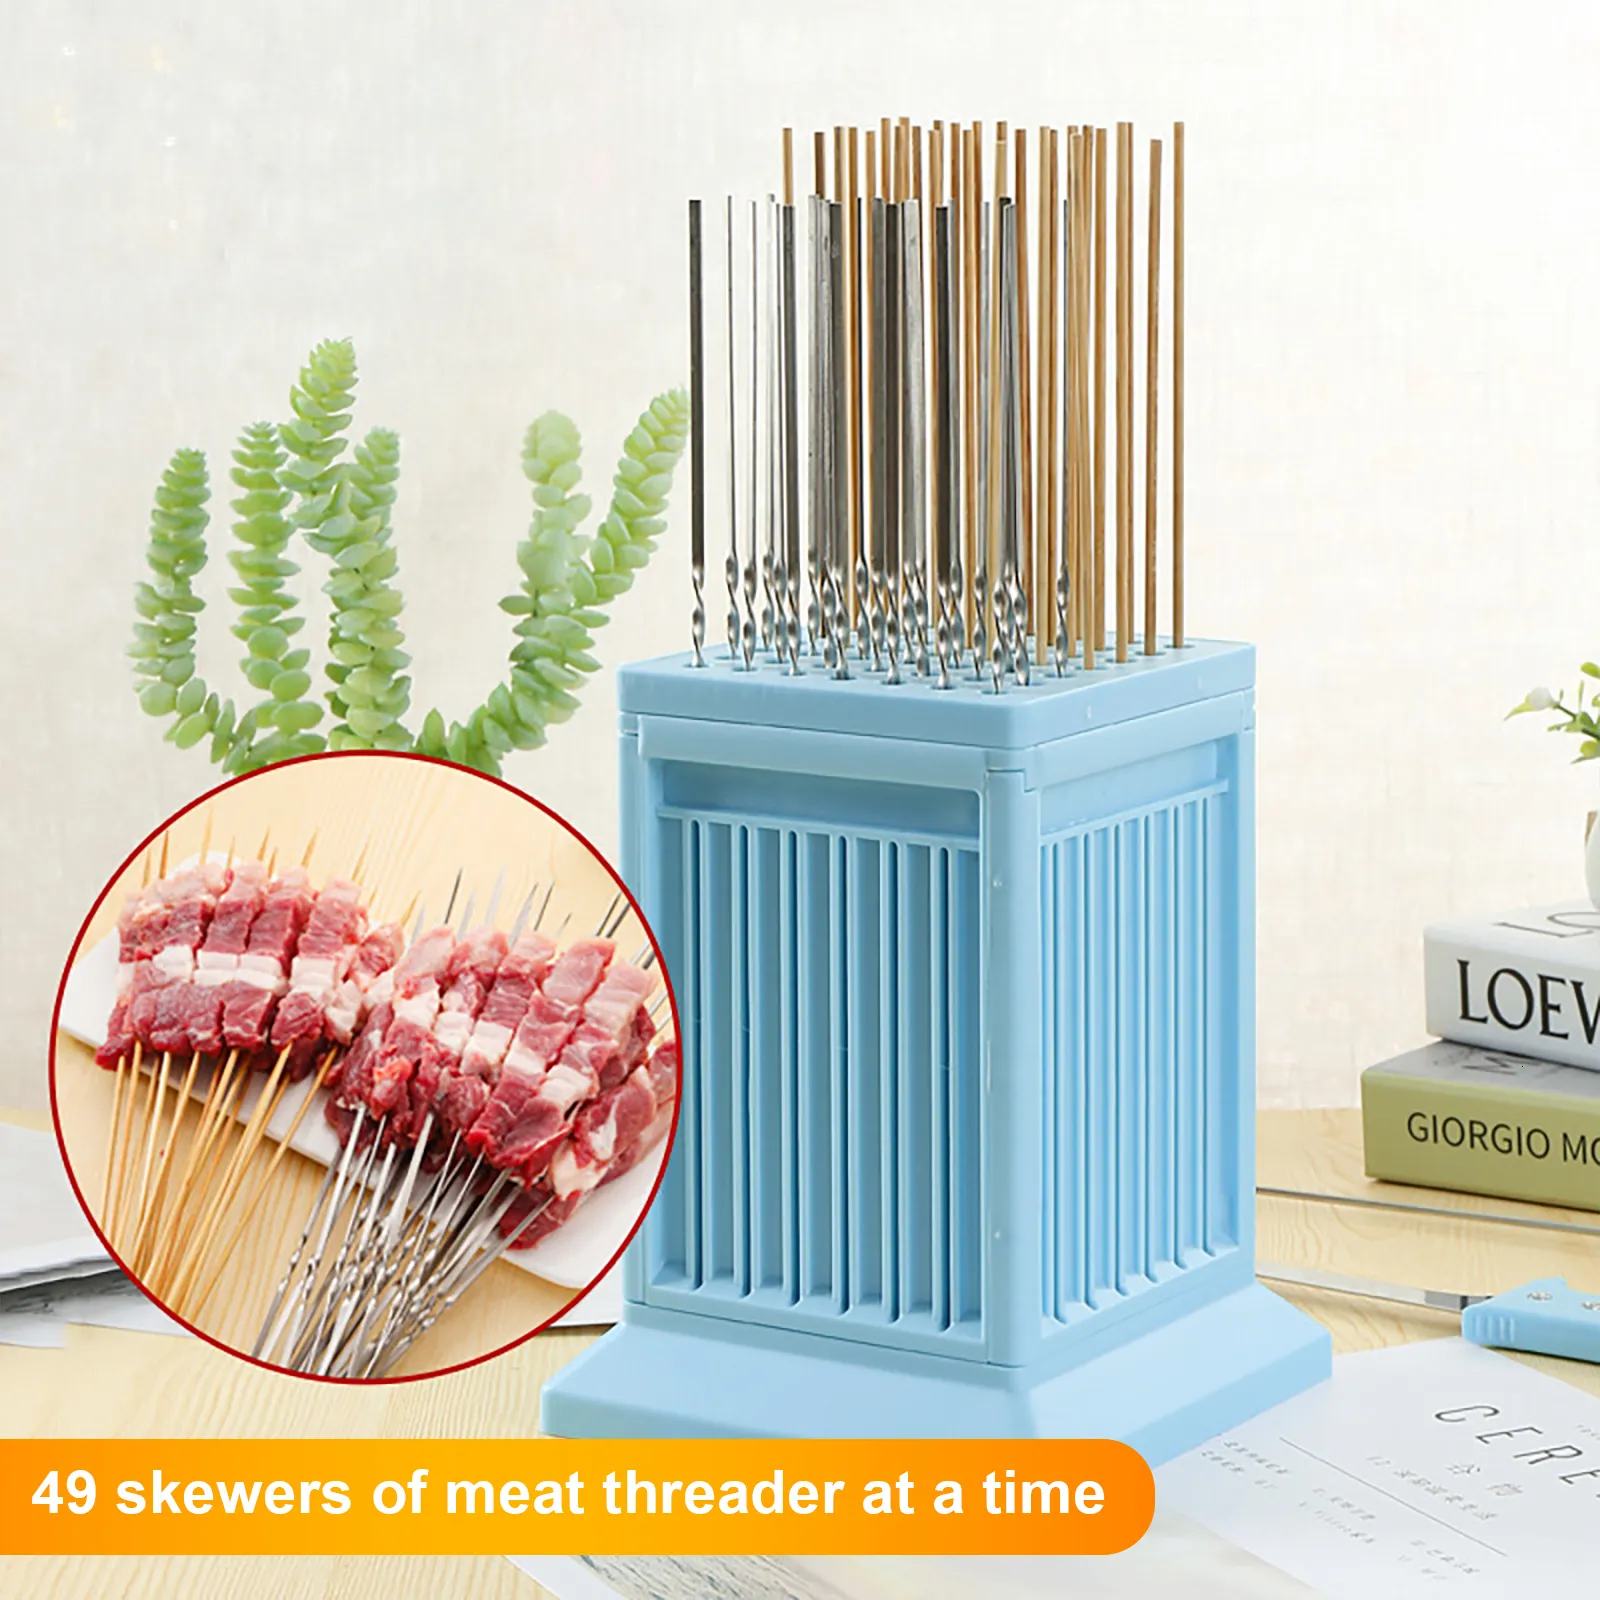 BBQ Tools Accessories 49 Holes BBQ Meat Skewer Tool Box Kebab Maker Barbecue Fast Maker Meat Cutter Roast Kitchen Accessories for Home BBQ Party 230714